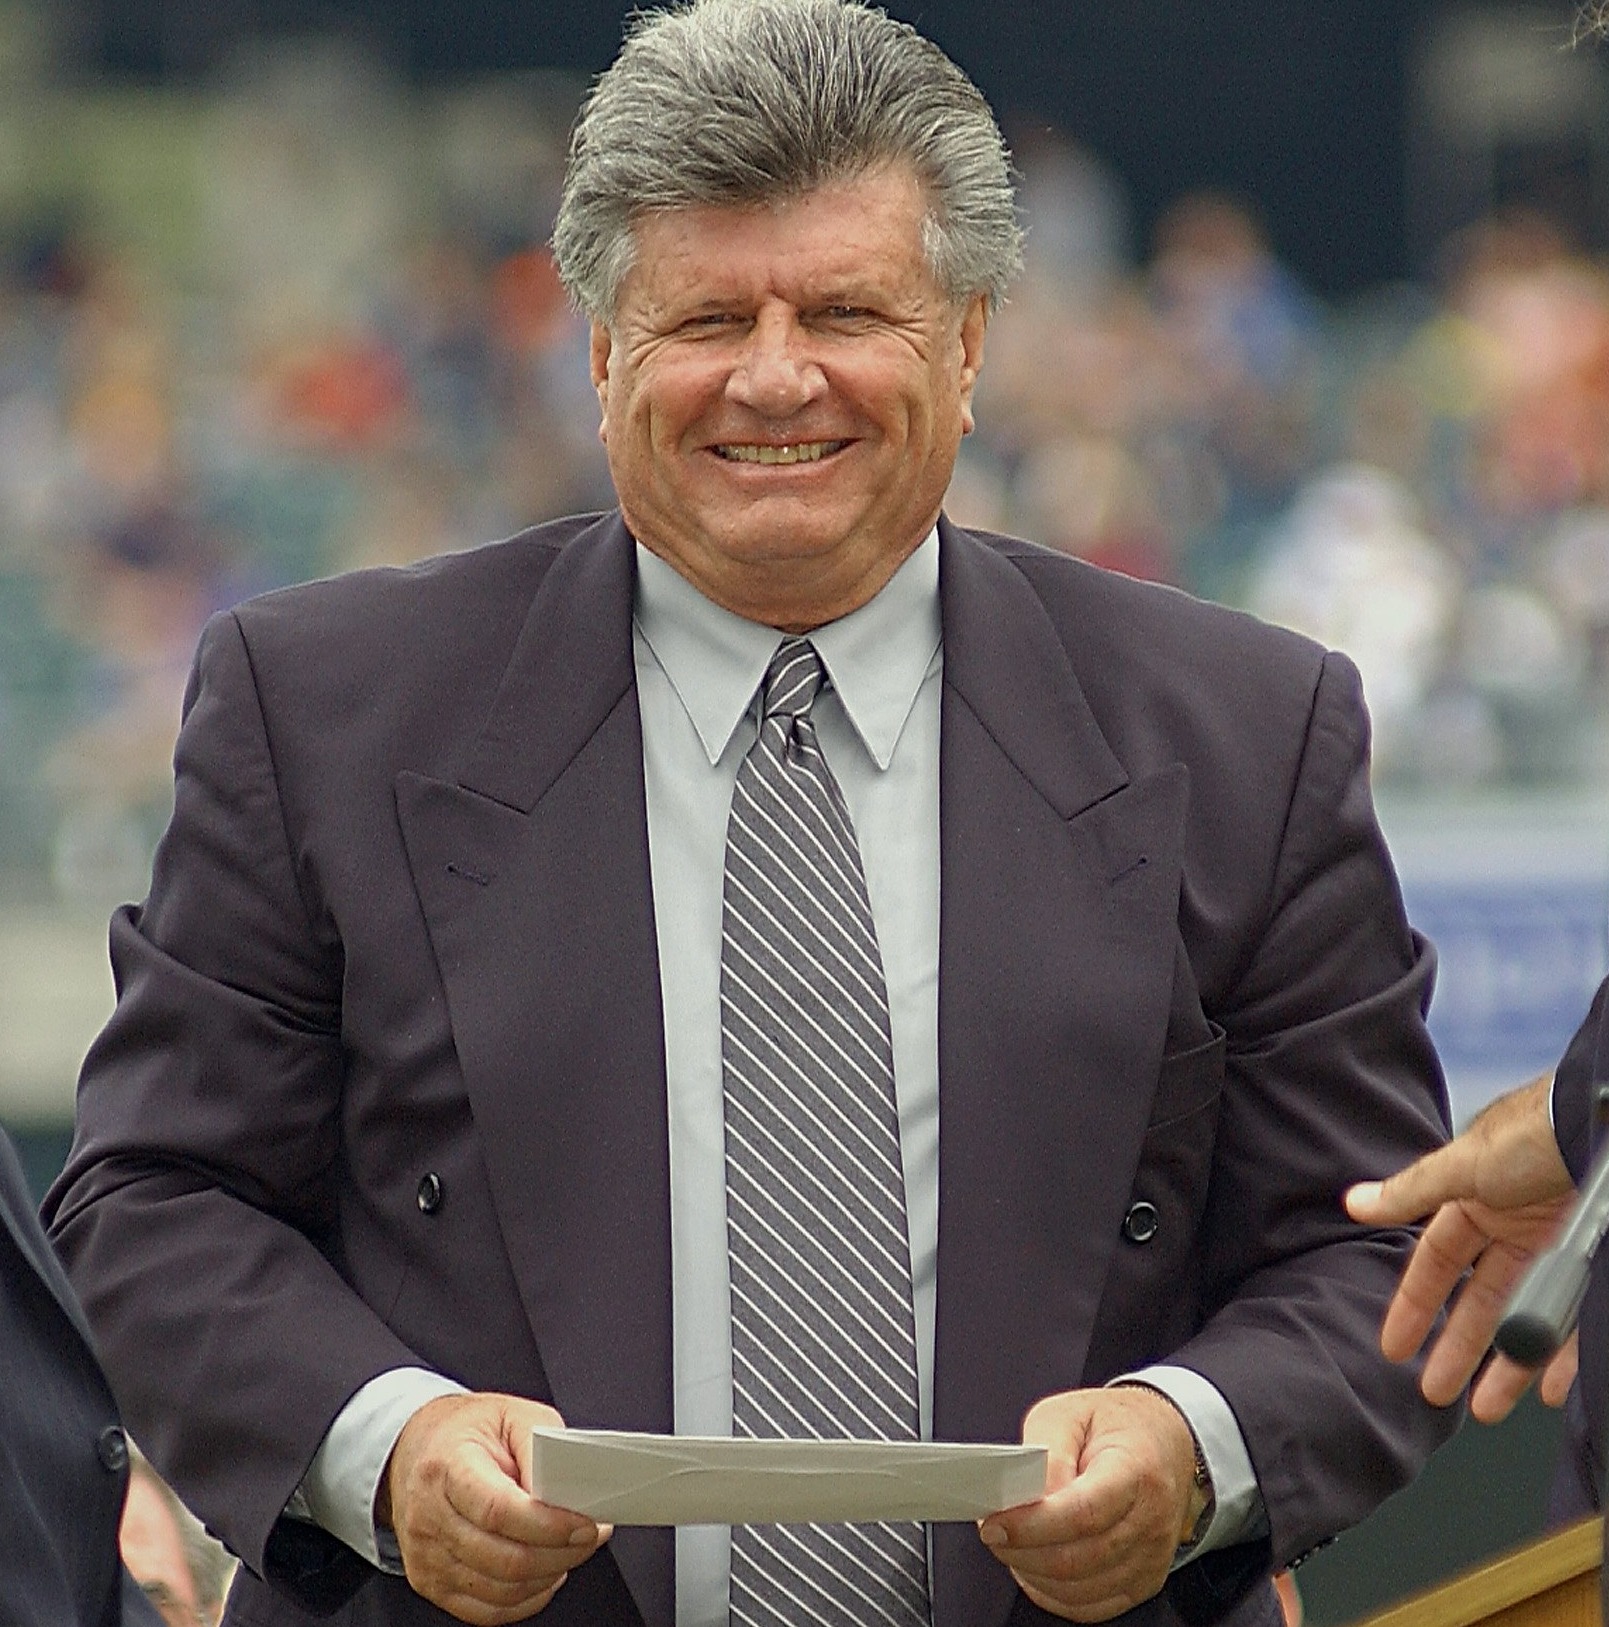 Detroit Tigers Mourn Passing of World Series Champion and Broadcaster, Jim  Price - Ilitch Companies News Hub